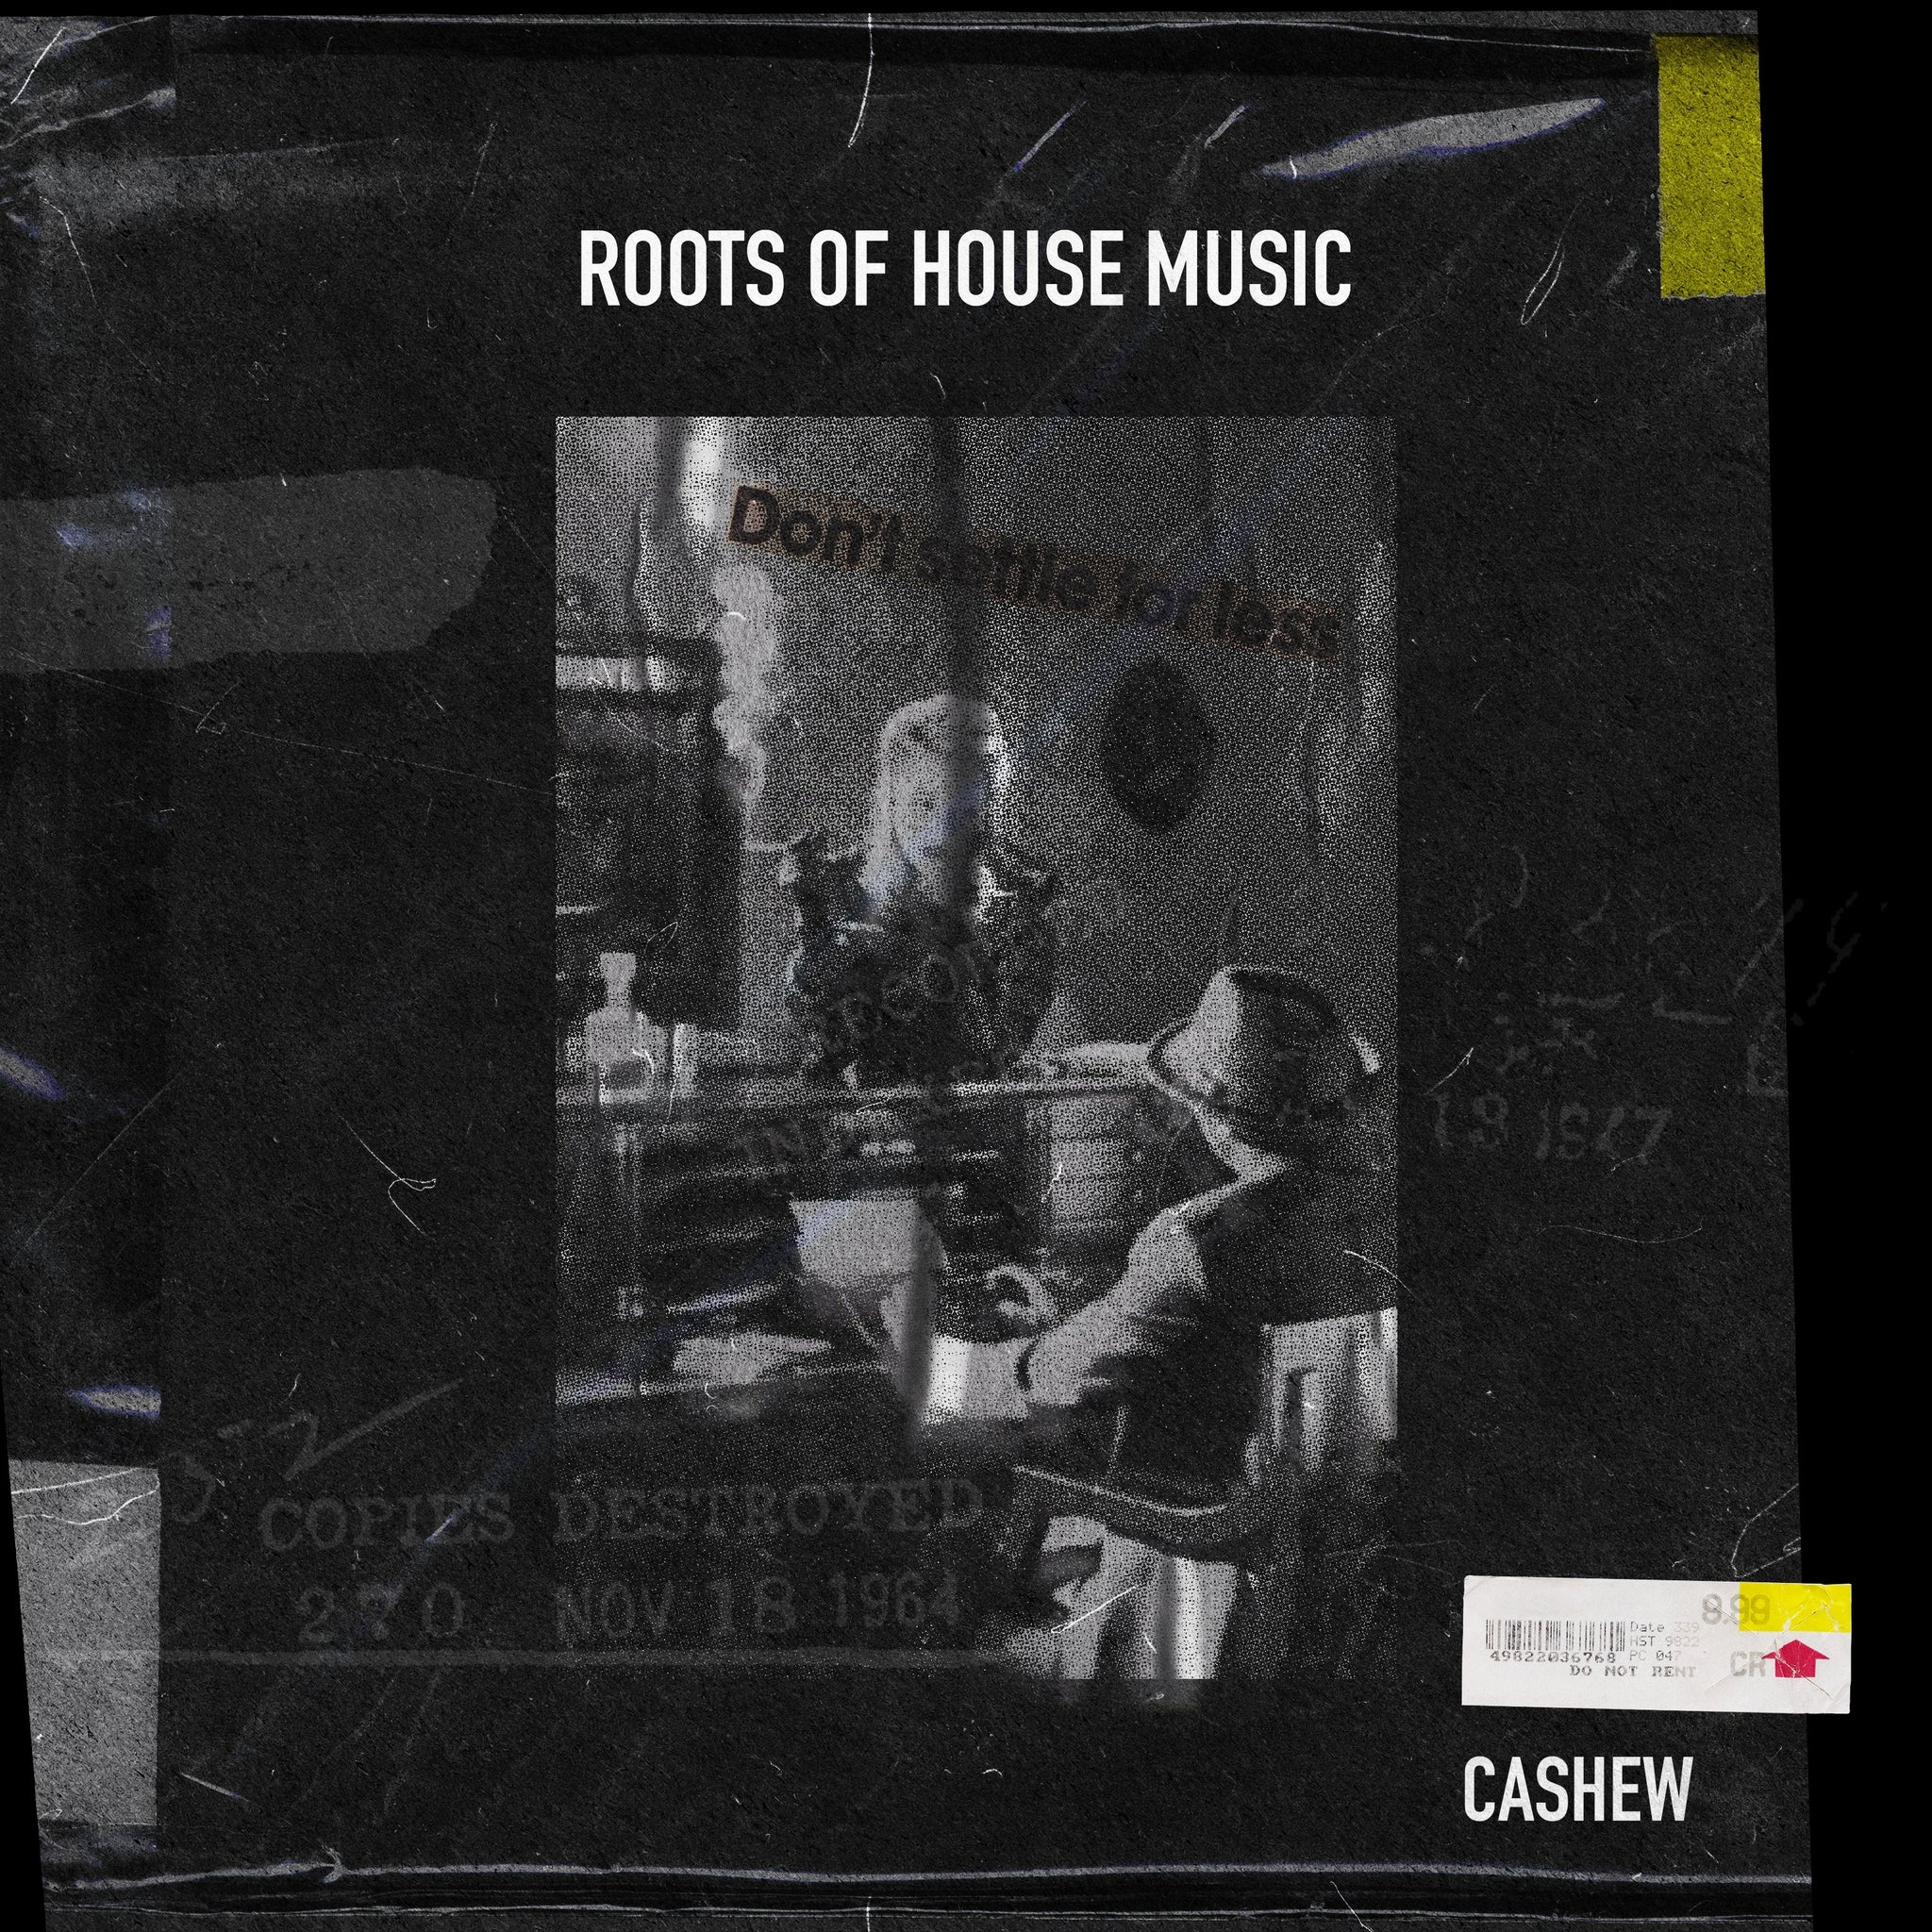 Roots Of House Music - CASHEW - Scraps Audio